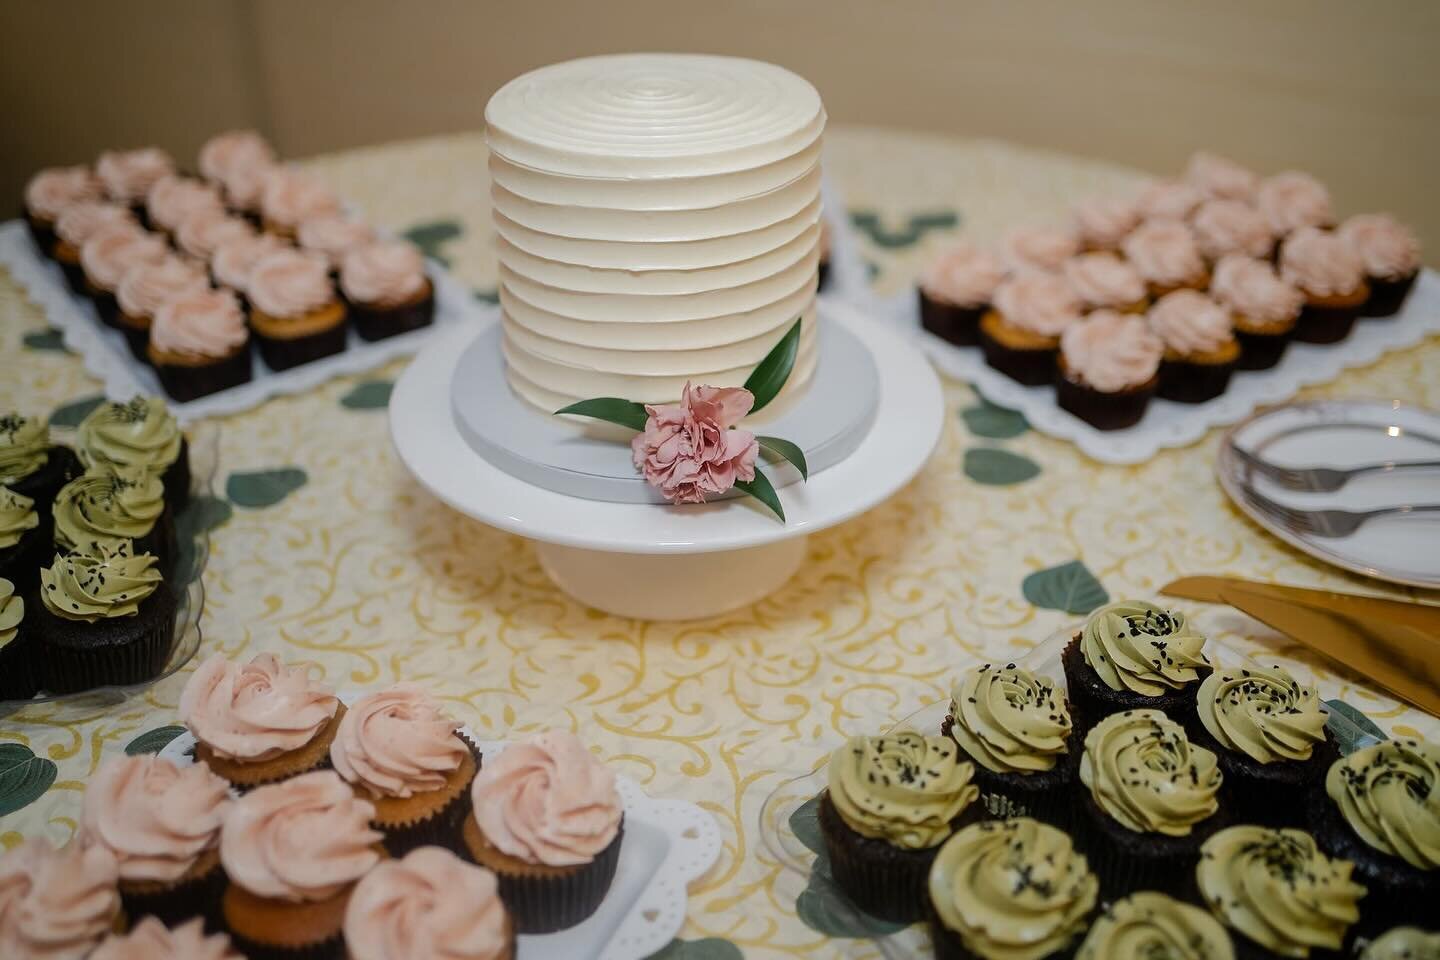 S I M P L I C I T Y ✨

This dessert station we put together (at the last minute 😅) was simple yet beautiful. E&amp;H went with a small one tiered wedding cake from @silverwhiskbakeshop and the rest were Asian inspired flavored donuts and cupcakes wh